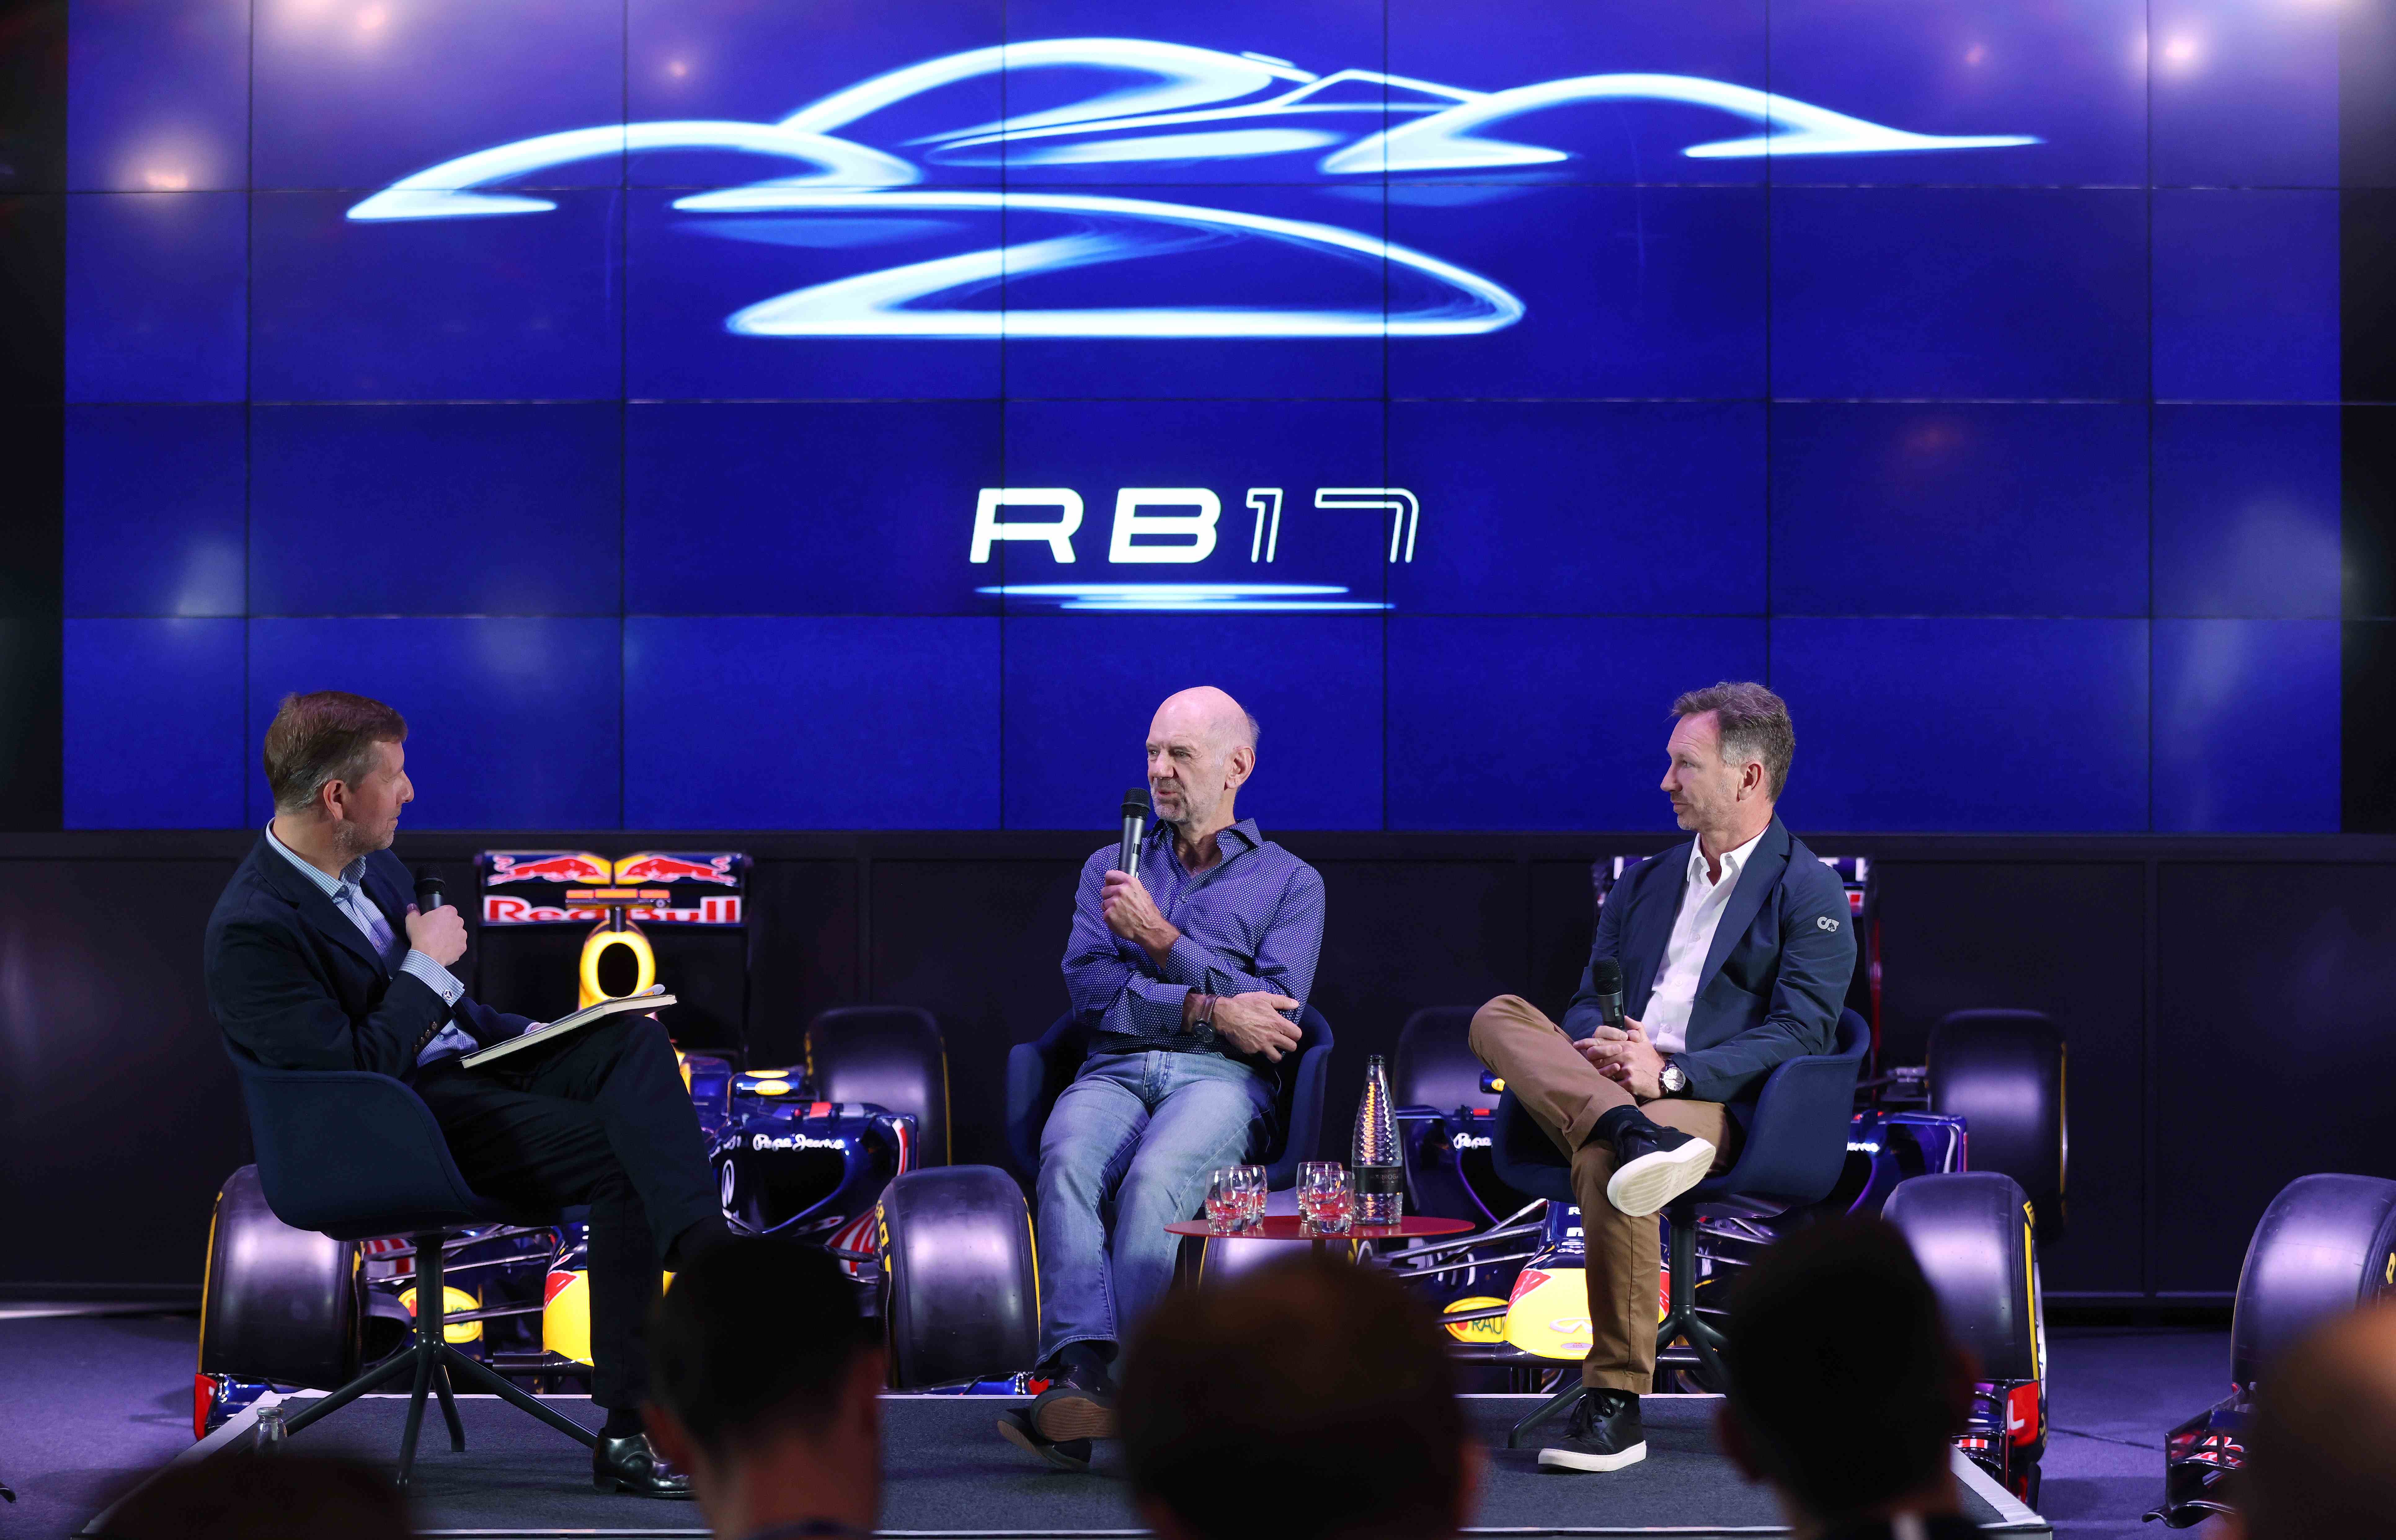 rb17